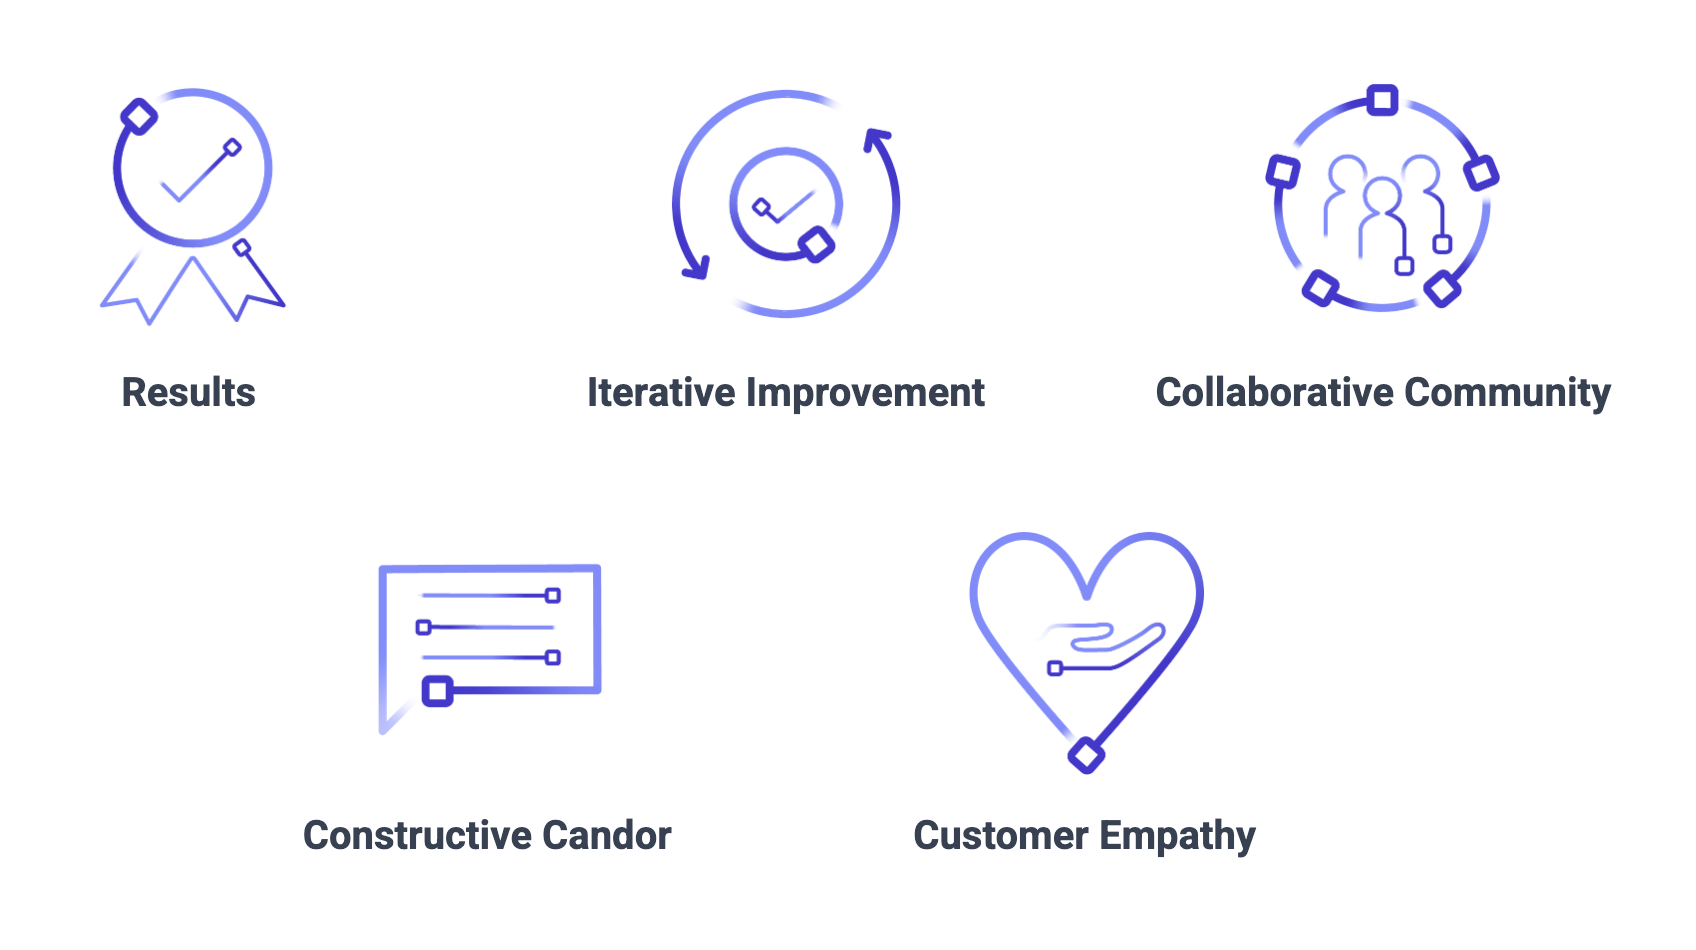 An example showing how Pictograms are used in the 'Company Values' section of the FlowForge website